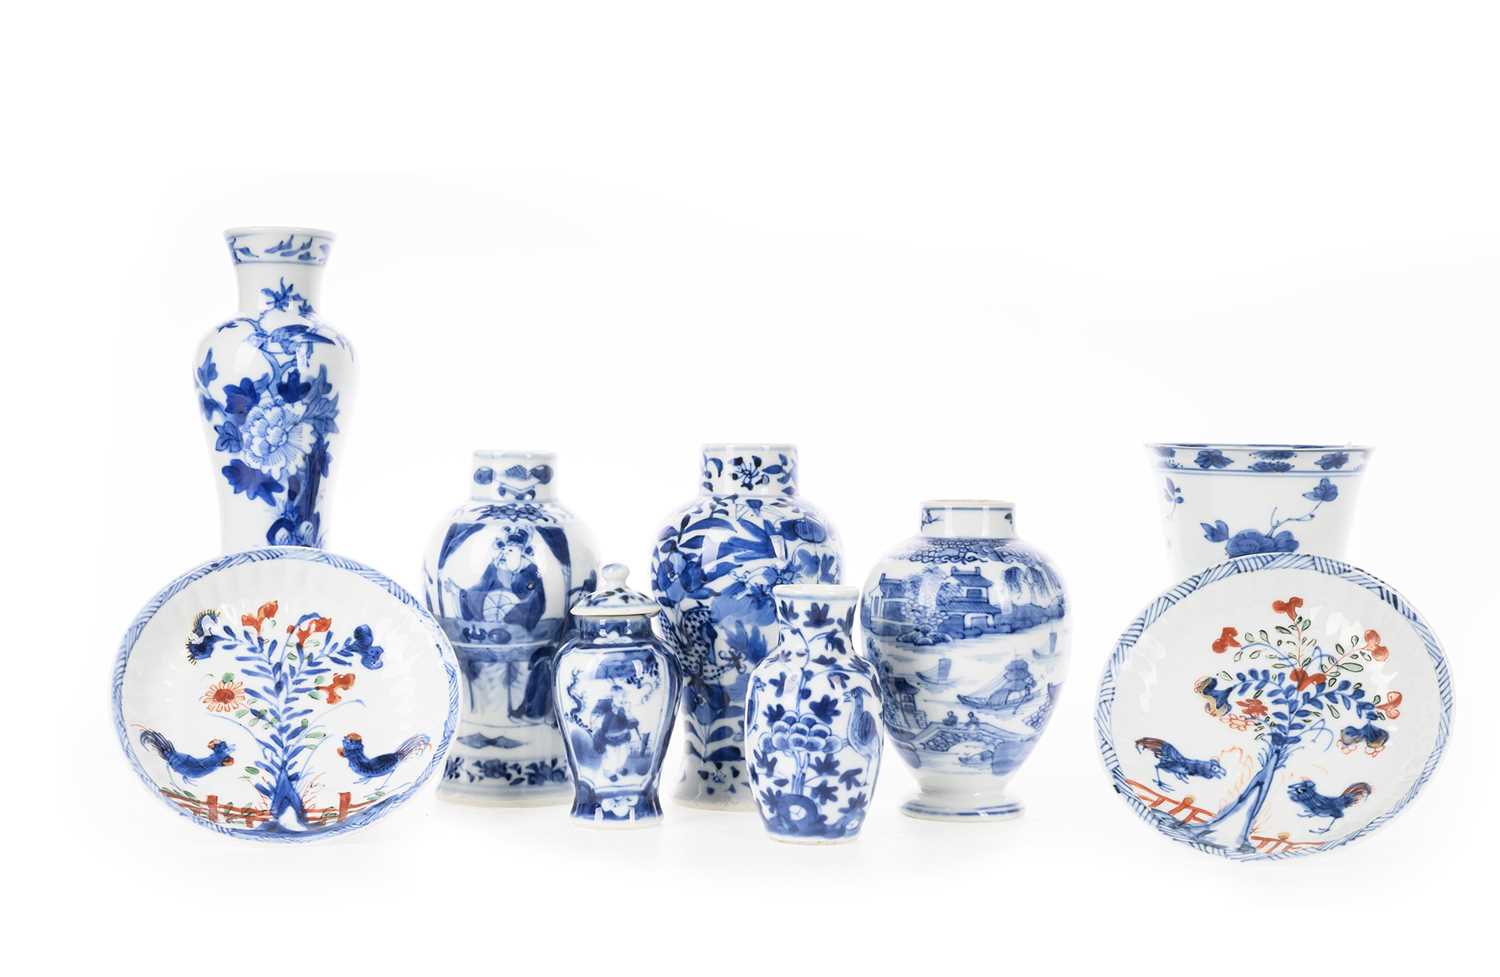 GROUP OF CHINESE PORCELAIN, 18TH AND 19TH CENTURY